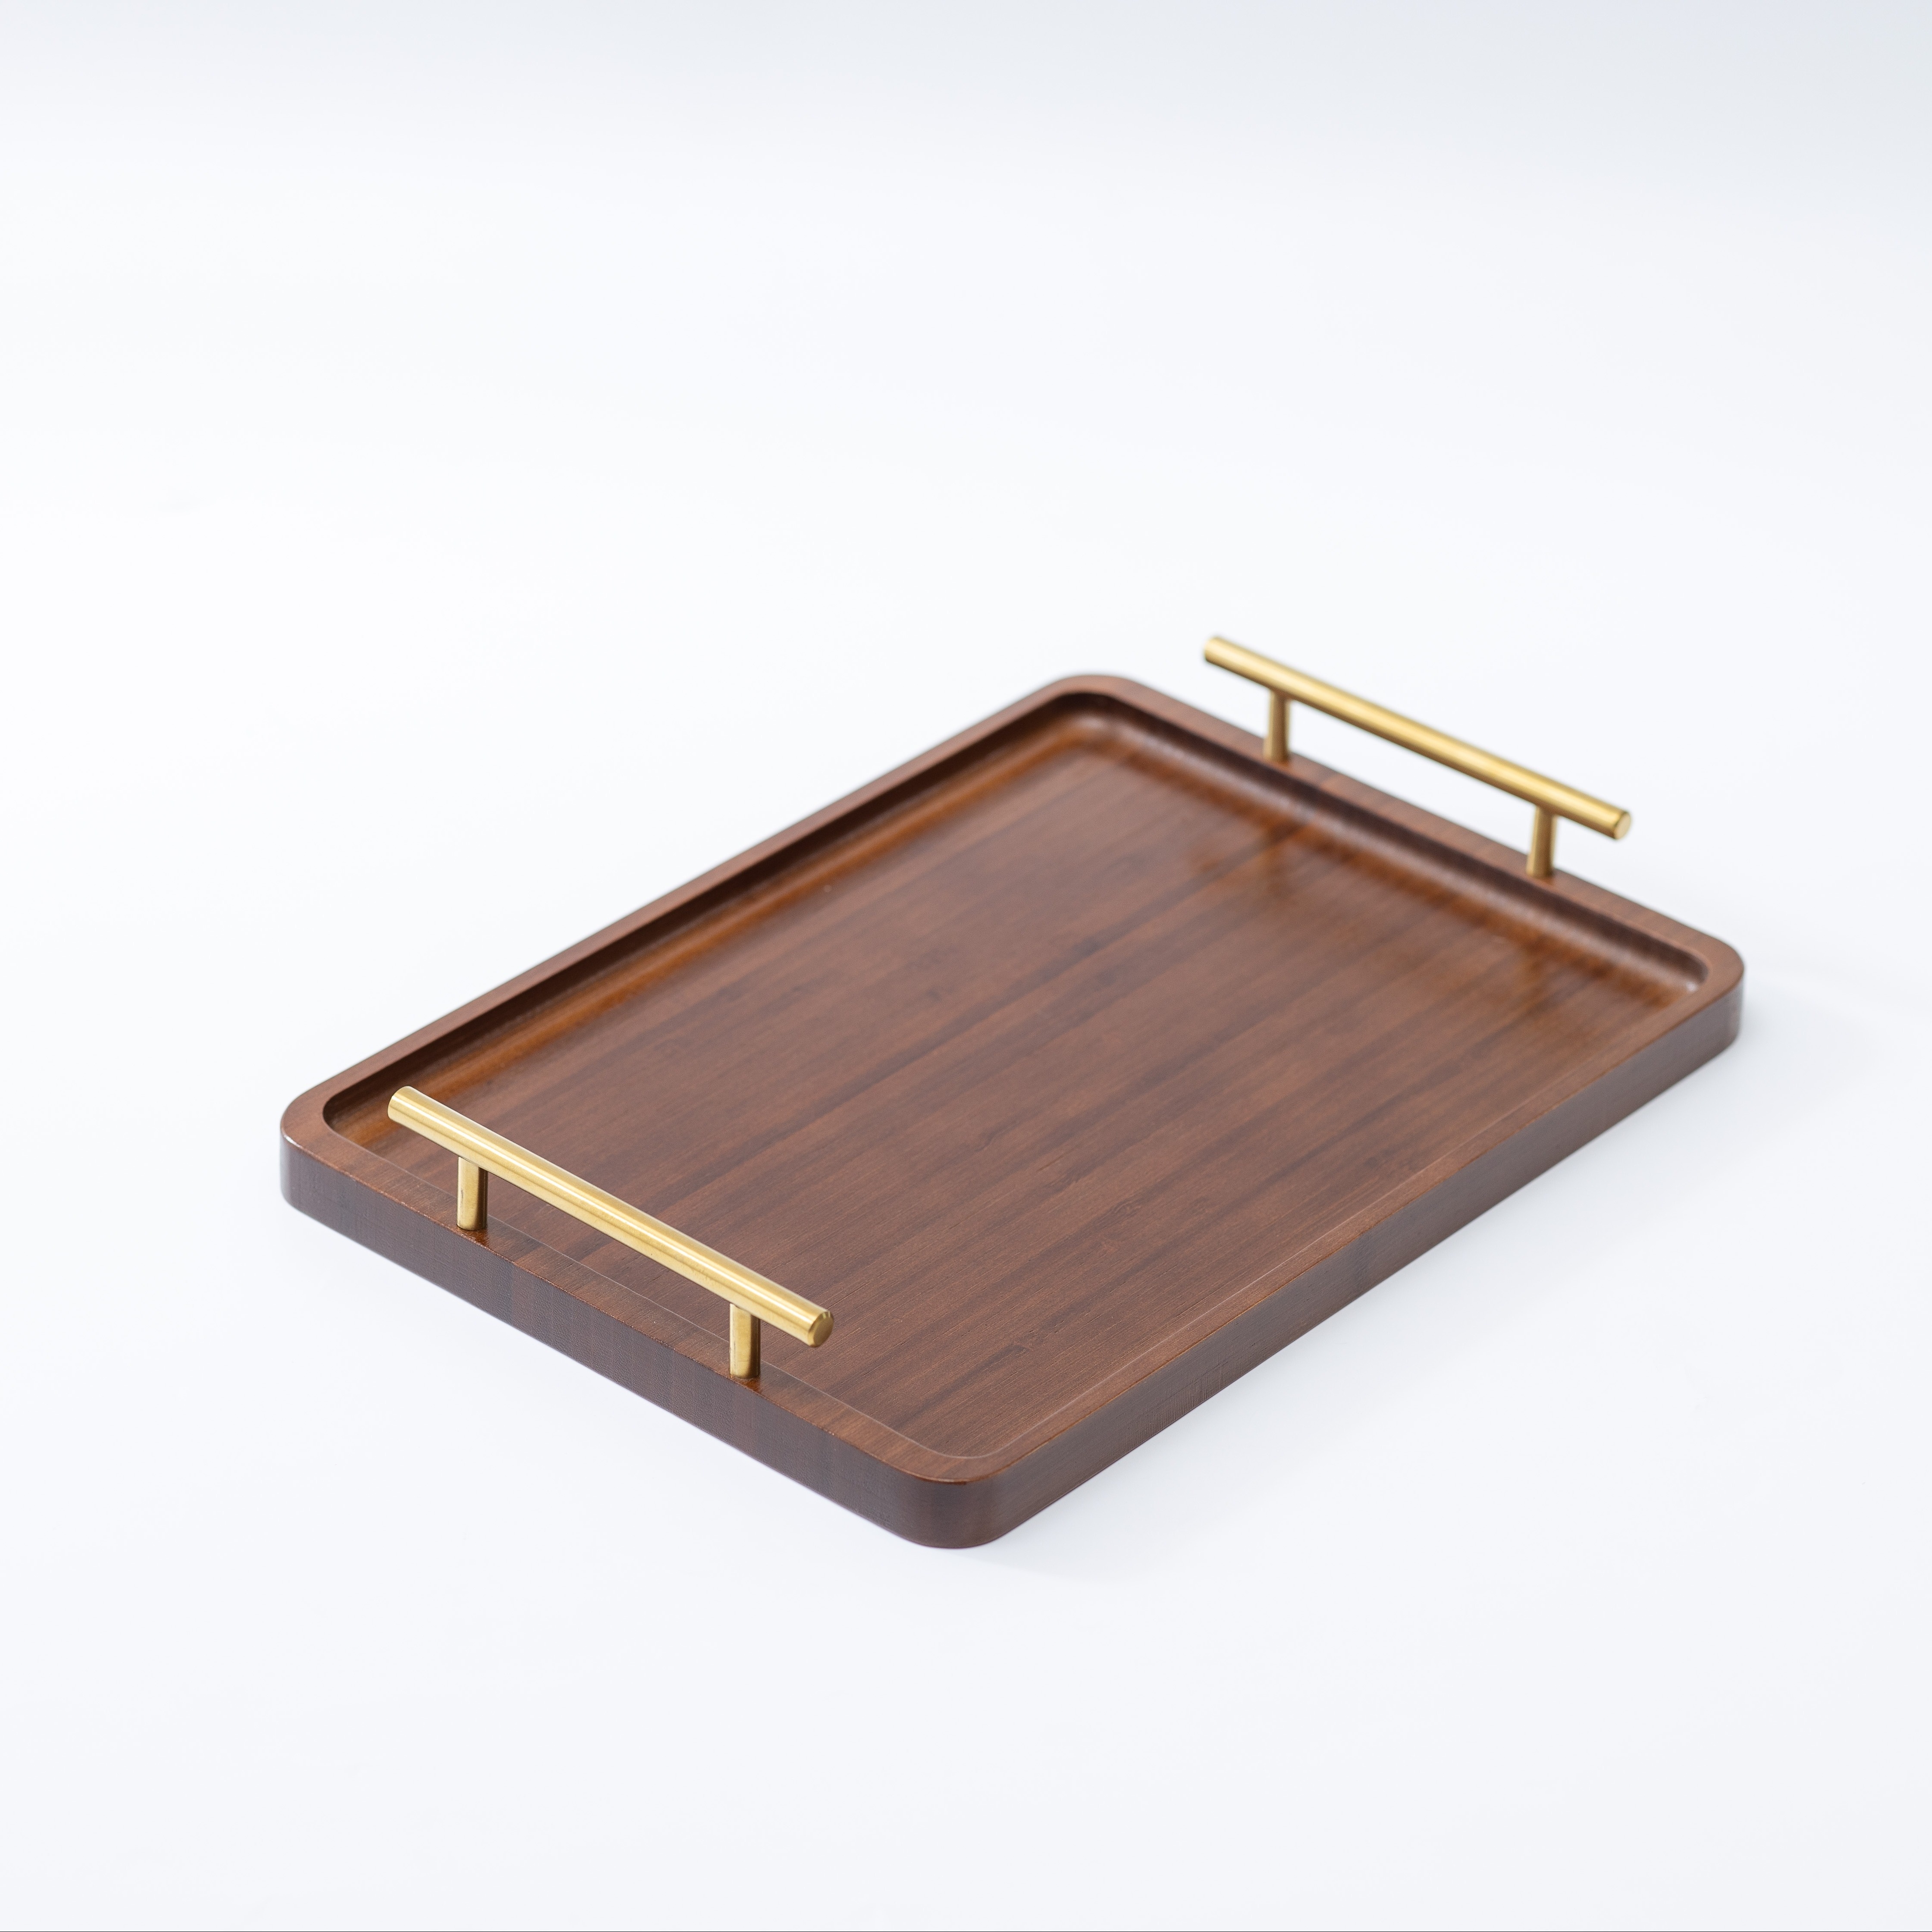 

1pc, Bamboo Tray, Rectangular Tea Serving Tray With Handles, Vintage Style Creative Cup Plate, Dark Brown, For Home And Commercial Use, Table Organizers